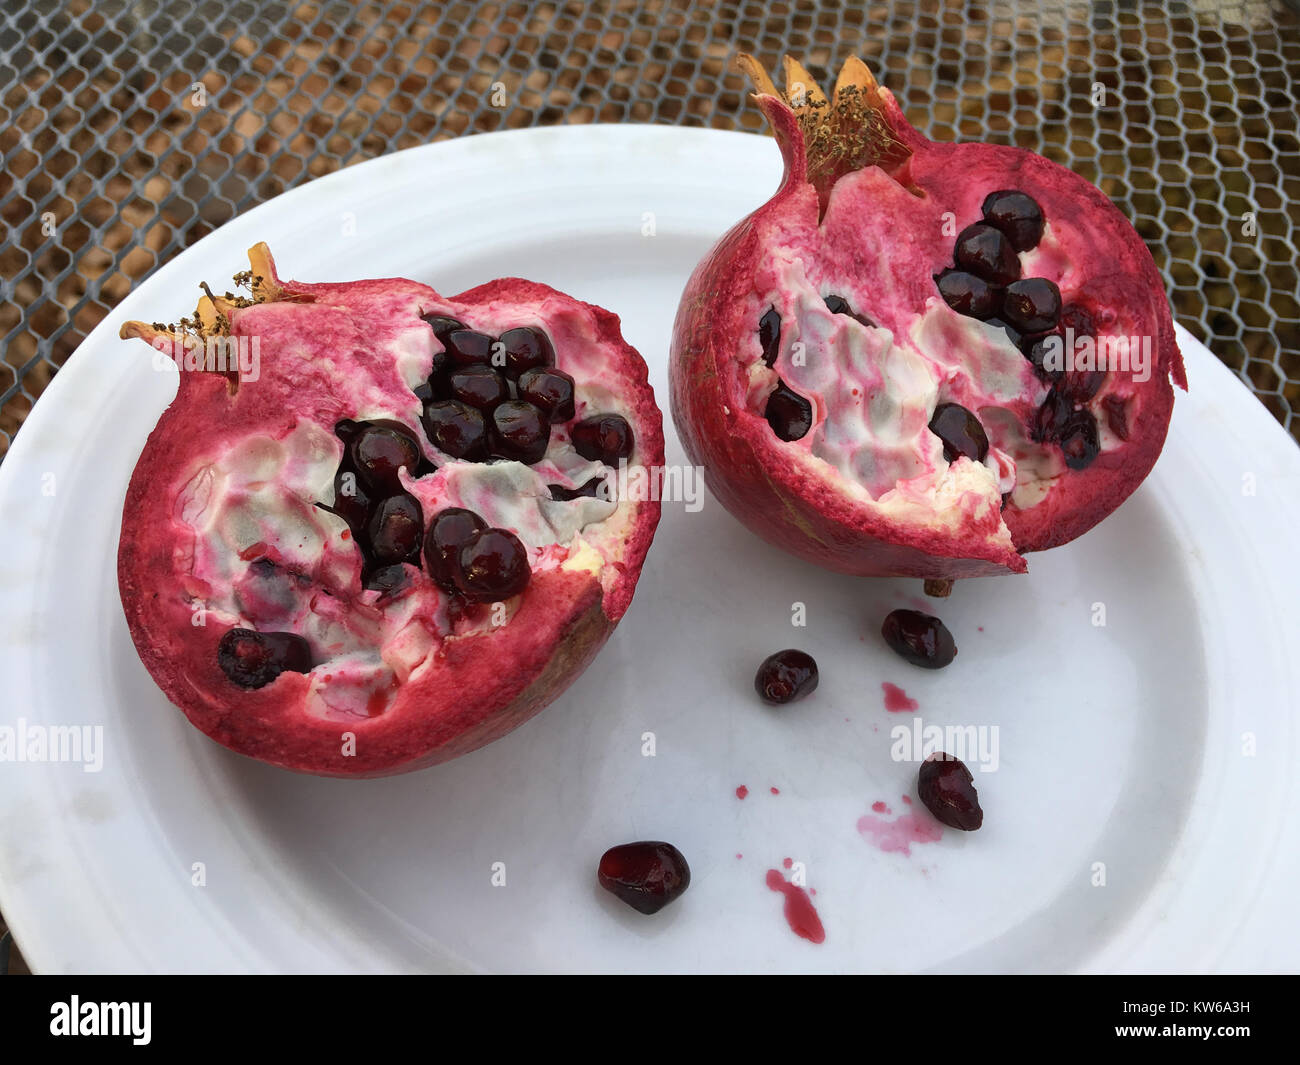 Opened pomegranate and seeds on white plate Stock Photo